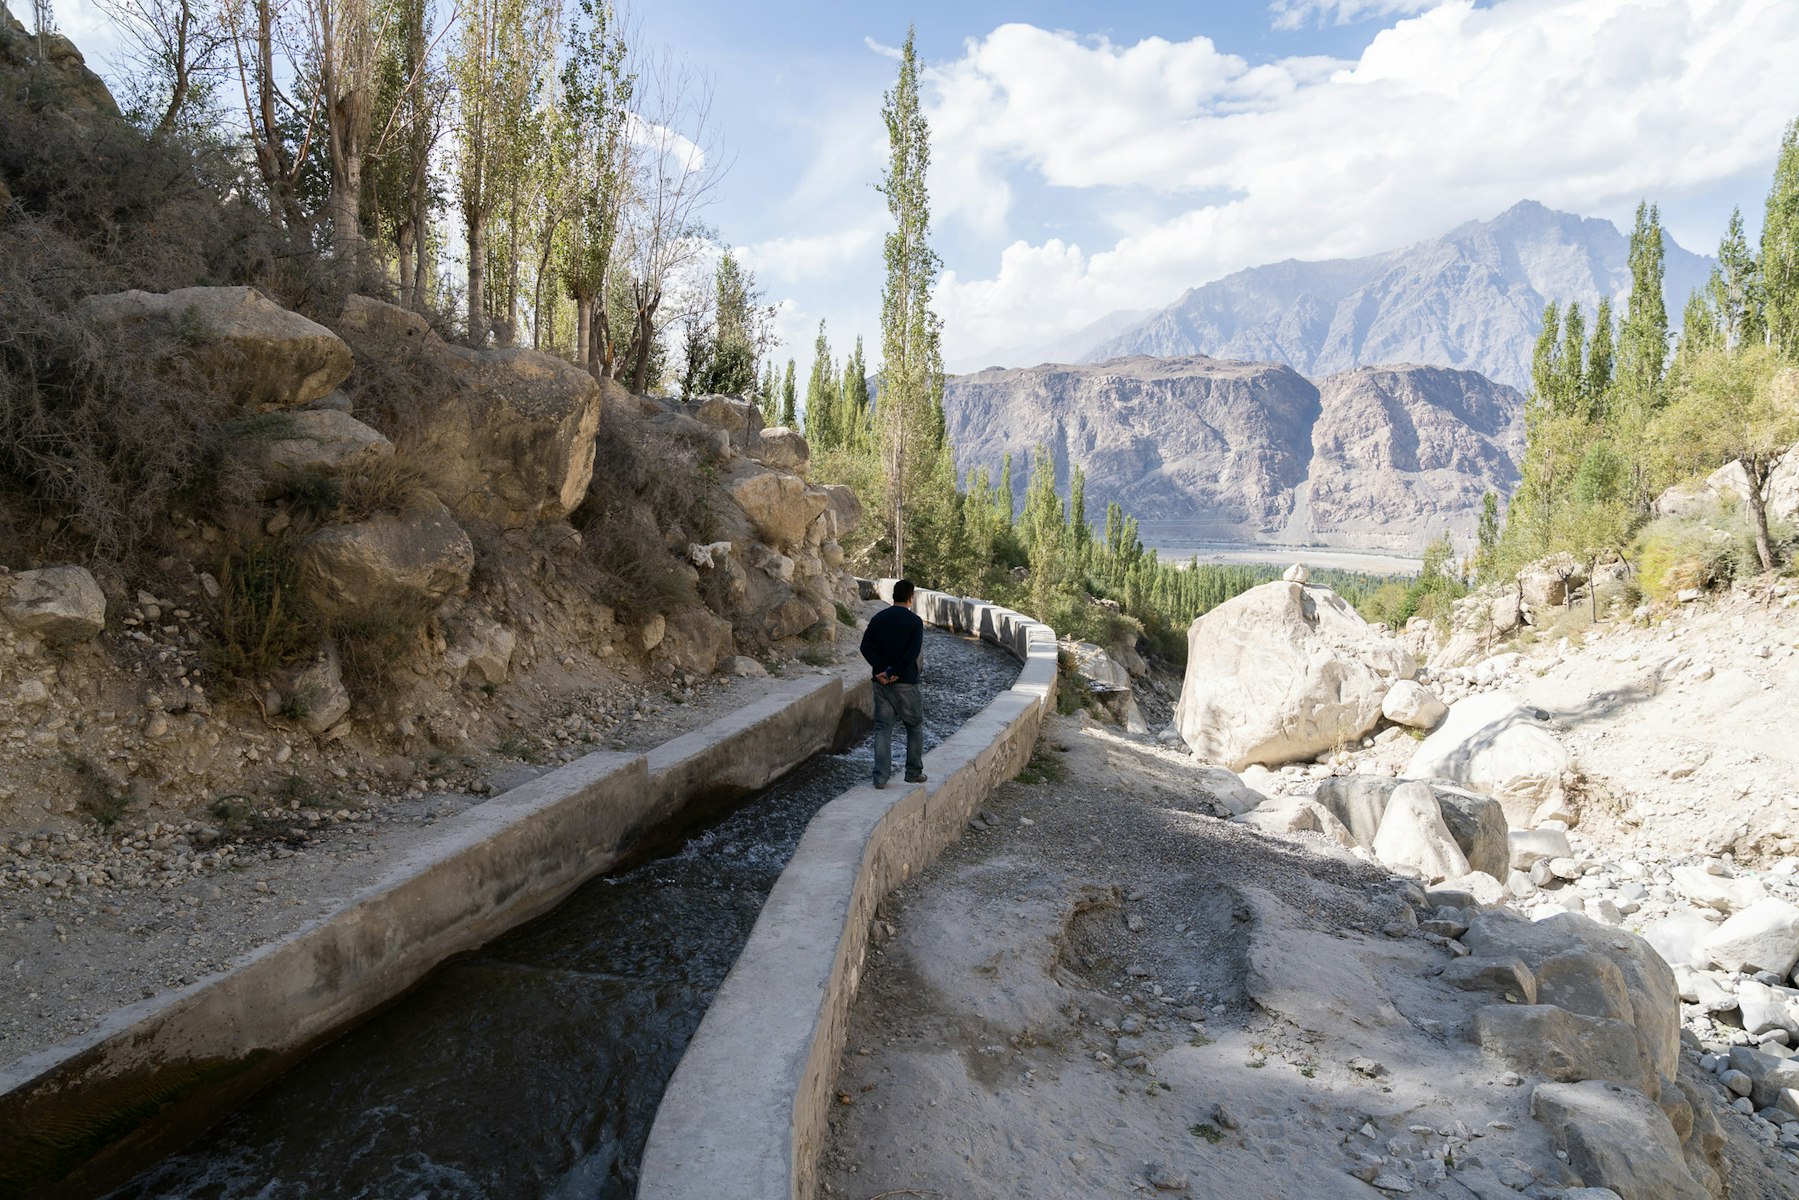 In the north of Pakistan, the breathtaking Himalayan, Karakorum, and Hindu Kush mountain ranges meet. However, behind the region’s picturesque scenery lies a harsh reality. For its 1.9 million inhabitants, water is an extremely scarce resource. To many this region is known as the "vertical desert".